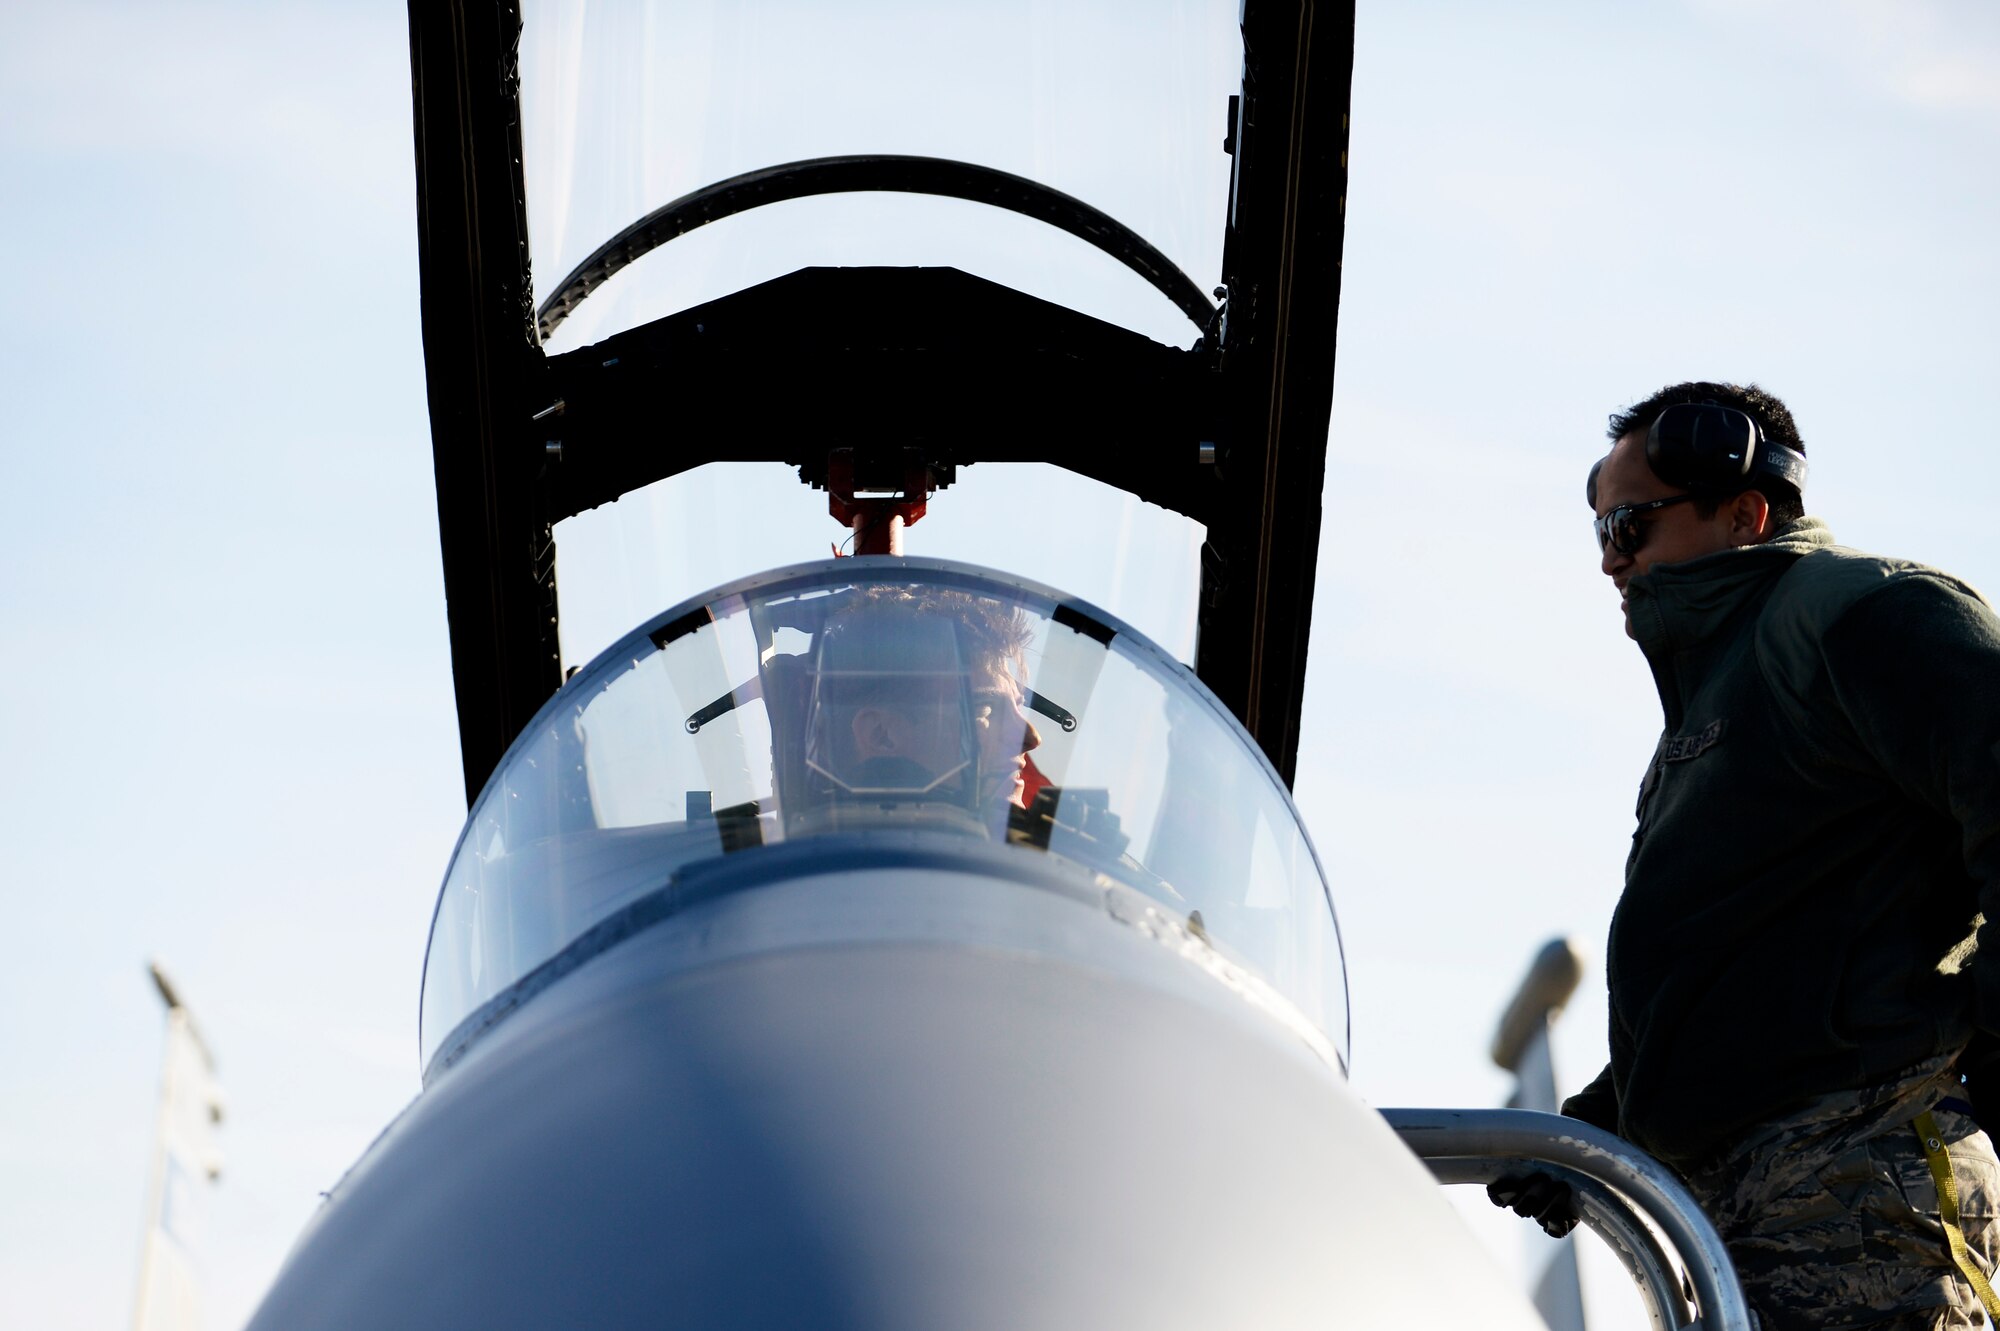 An F-15C Eagle pilot talks with his crew chief after landing at Leeuwarden Air Base, Netherlands, March 24, 2017. F-15C's from the Lousiana and Florida Air National Guard's 159th Expeditionary Fighter Squadron deployed to Europe to participate in a Theater Security Package. These F-15s will conduct training alongside NATO allies to strengthen interoperability and to demonstrate U.S. commitment to the security and stability of Europe. (U.S. Air Force photo by Tech. Sgt. Staci Miller)
	

	
